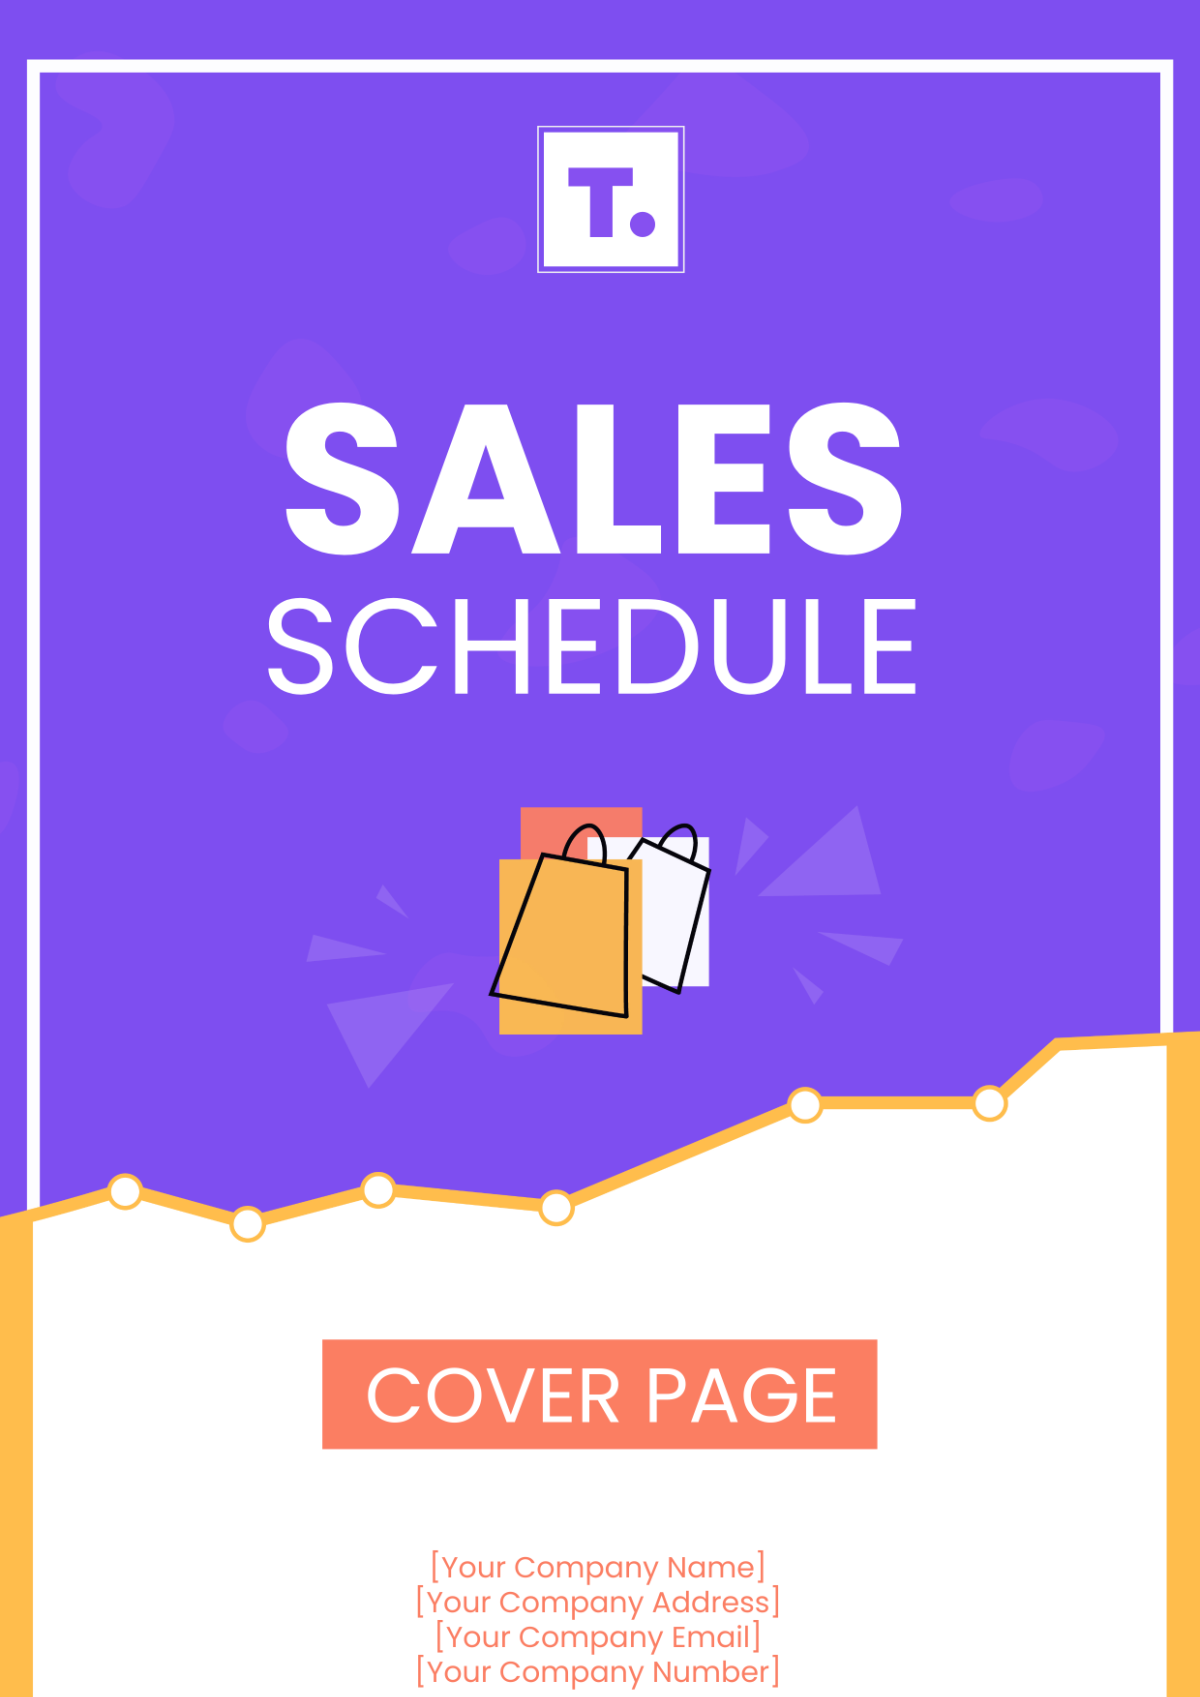 Sales Schedule Cover Page